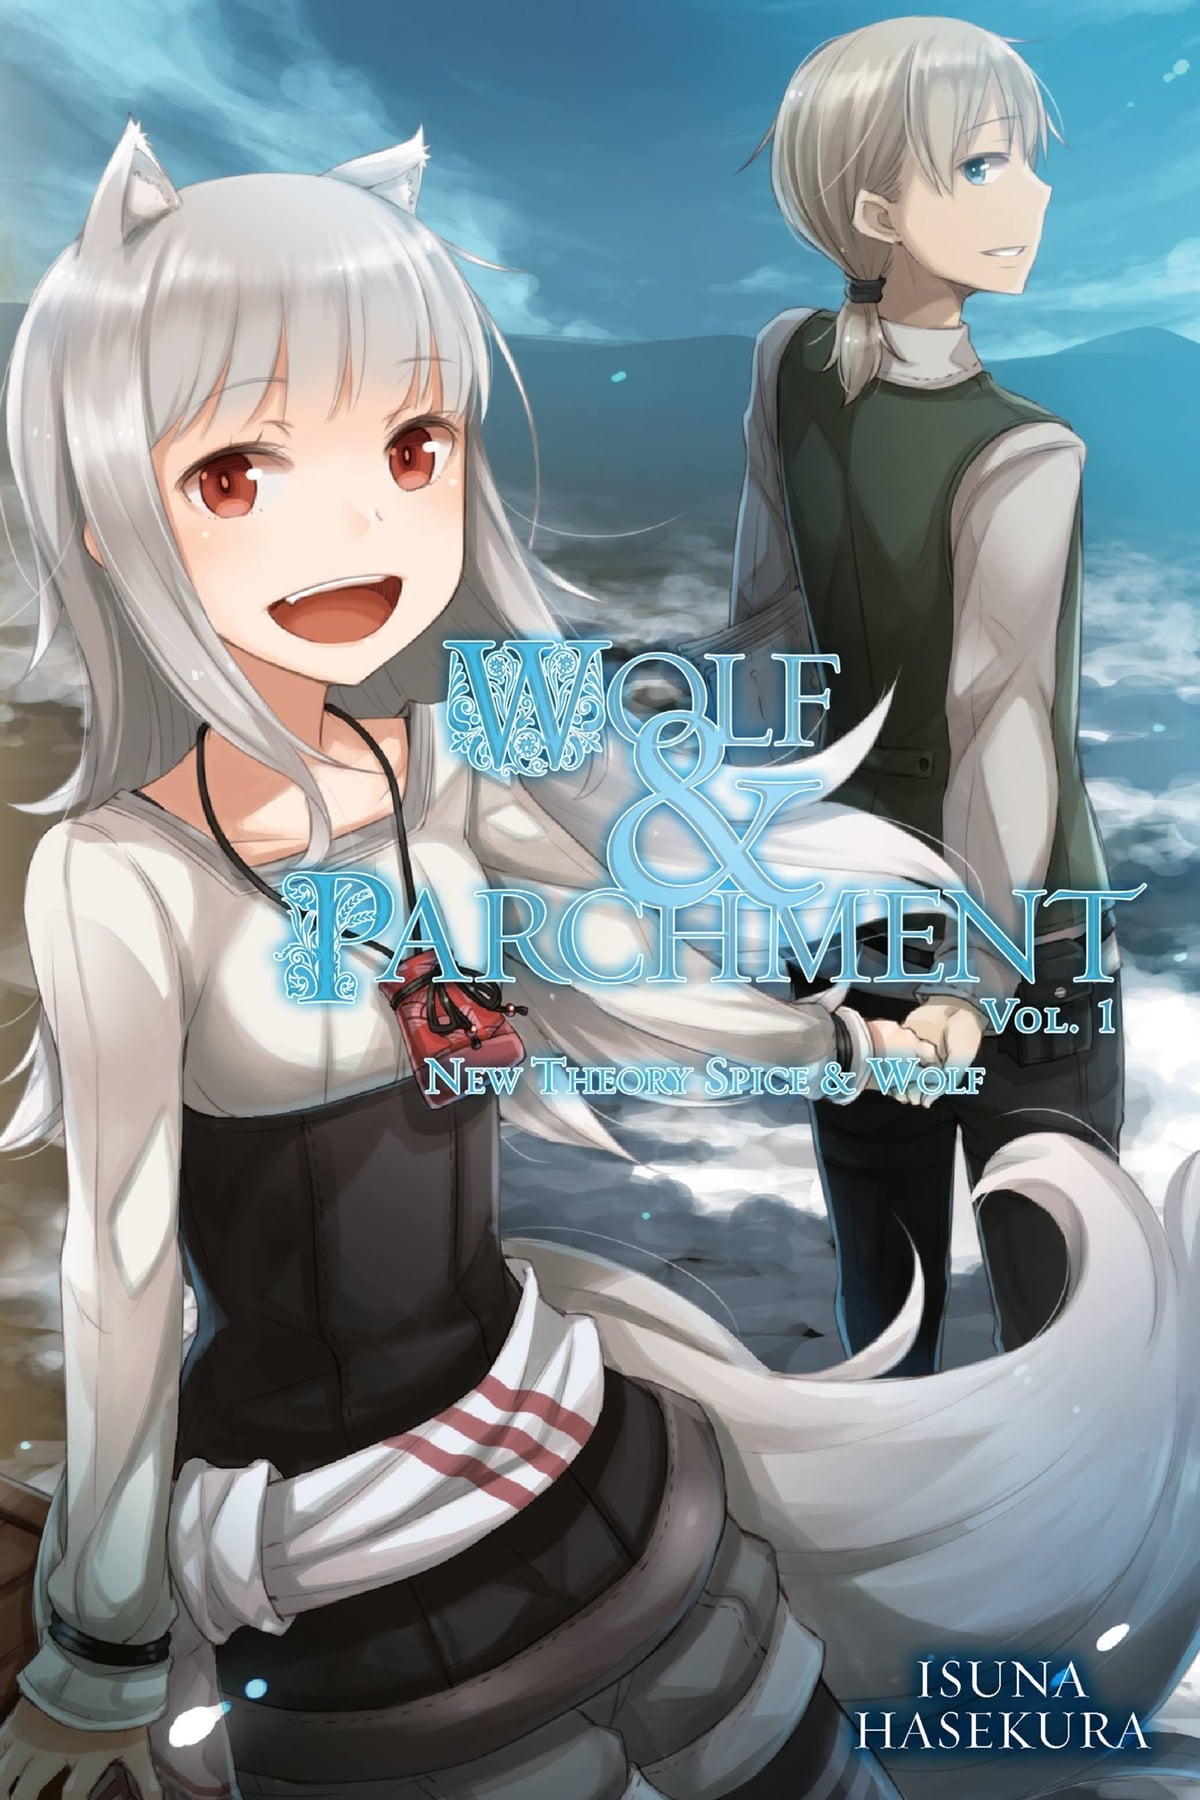 Wolf & Parchment: New Theory Spice & Wolf Vol. 01 (Light Novel)